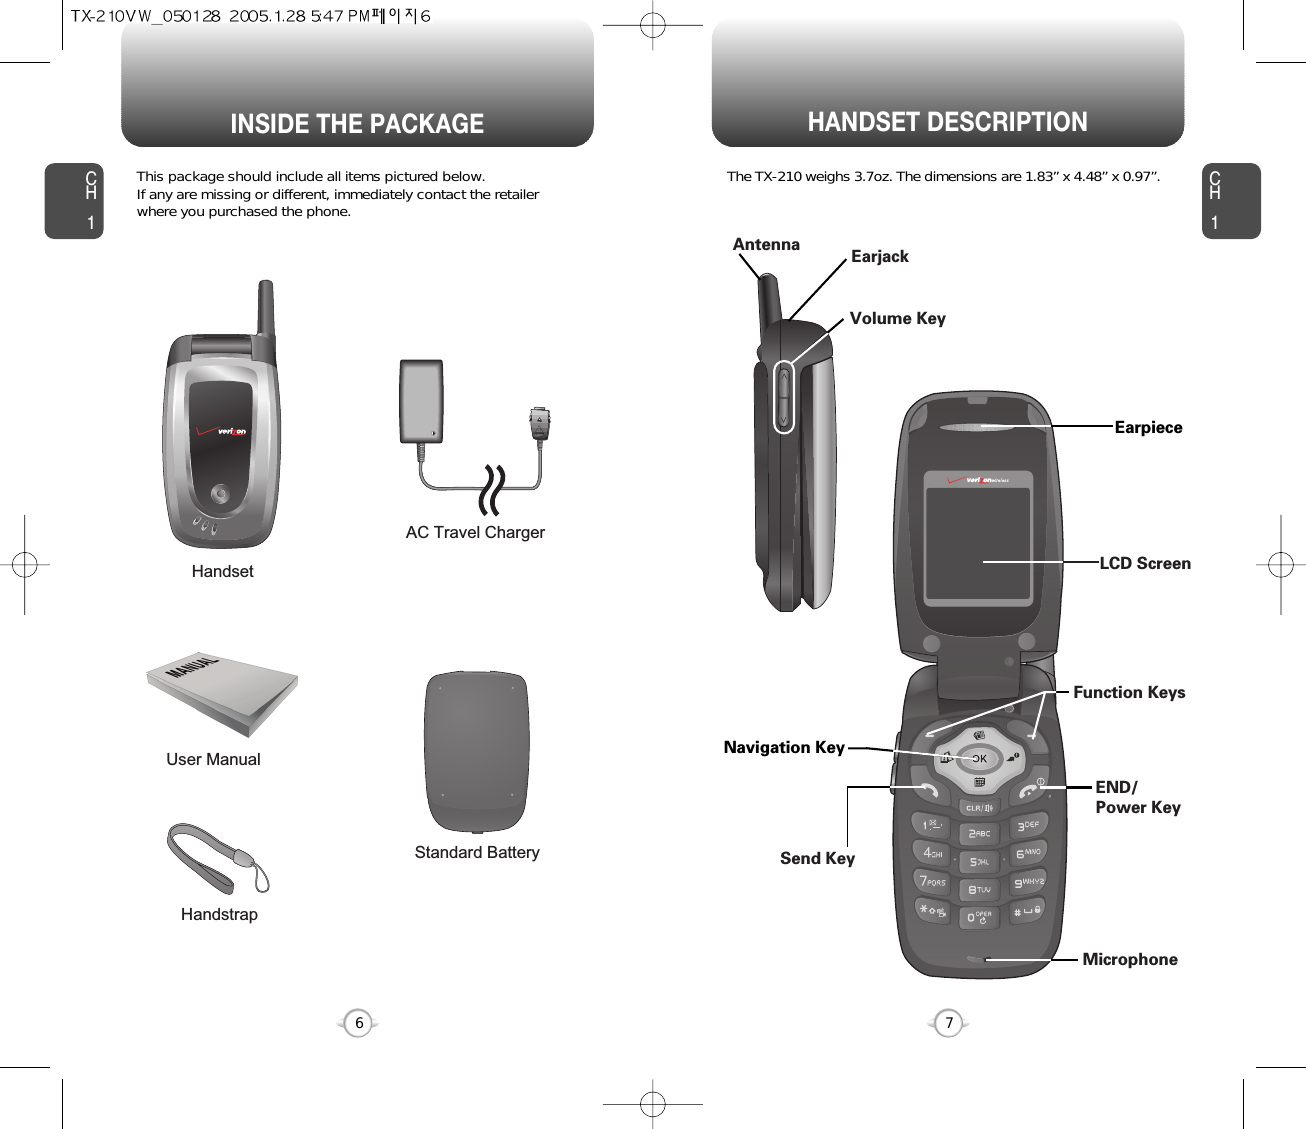 HANDSET DESCRIPTIONCH1This package should include all items pictured below. If any are missing or different, immediately contact the retailer where you purchased the phone.7INSIDE THE PACKAGECH16The TX-210 weighs 3.7oz. The dimensions are 1.83” x 4.48” x 0.97”.HandstrapUser ManualAC Travel ChargerHandsetStandard BatteryAntenna EarjackVolume KeyLCD ScreenFunction KeysSend KeyEND/Power KeyMicrophoneEarpieceNavigation Key